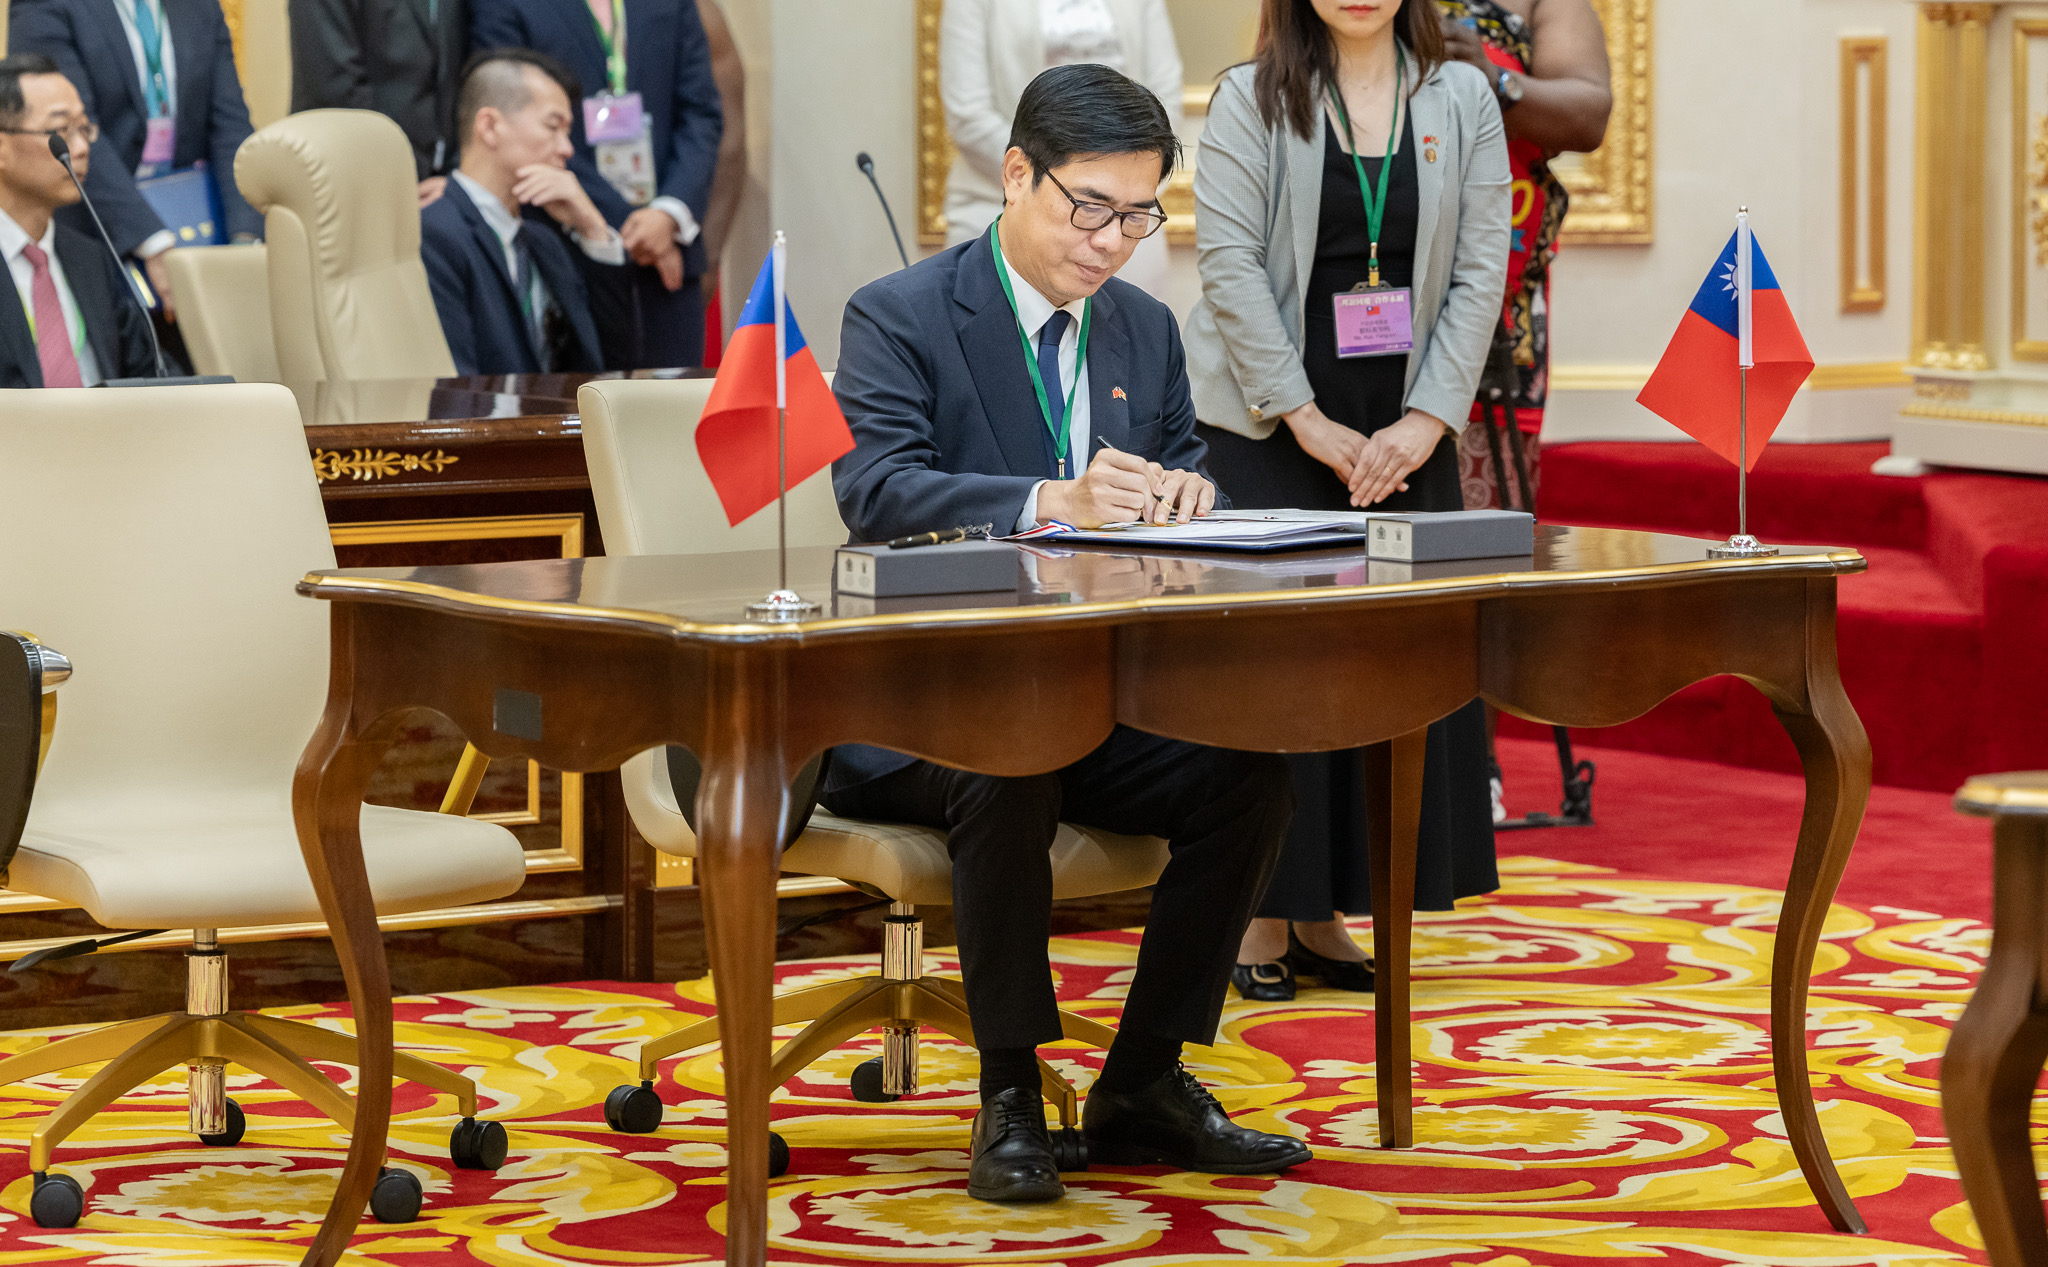 Kaohsiung and Mbabane signed the Sister City Agreement